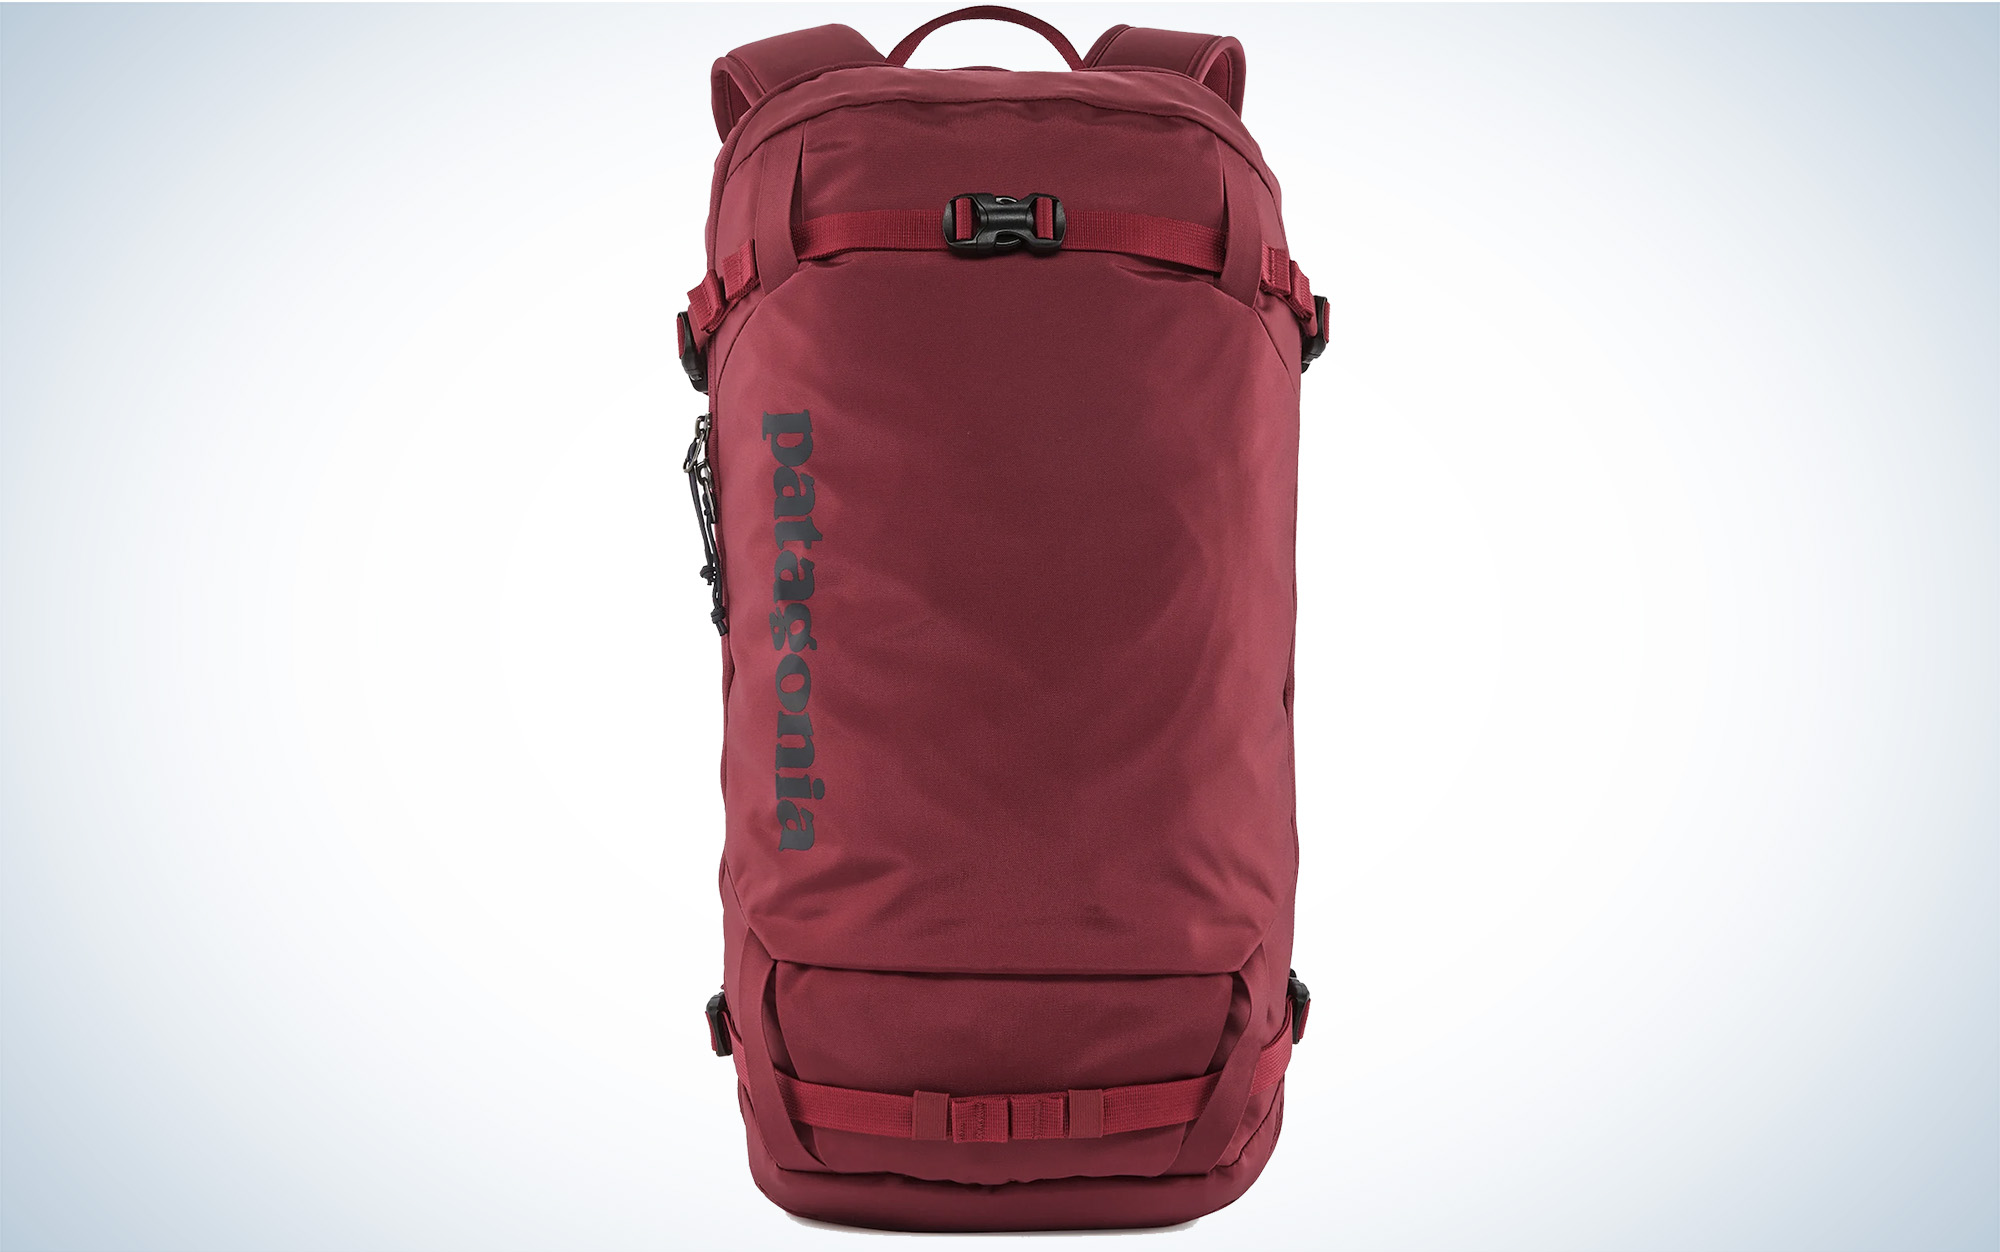 The Patagonia SnowDrifter 30L is one of the best winter backpacks for a full day.